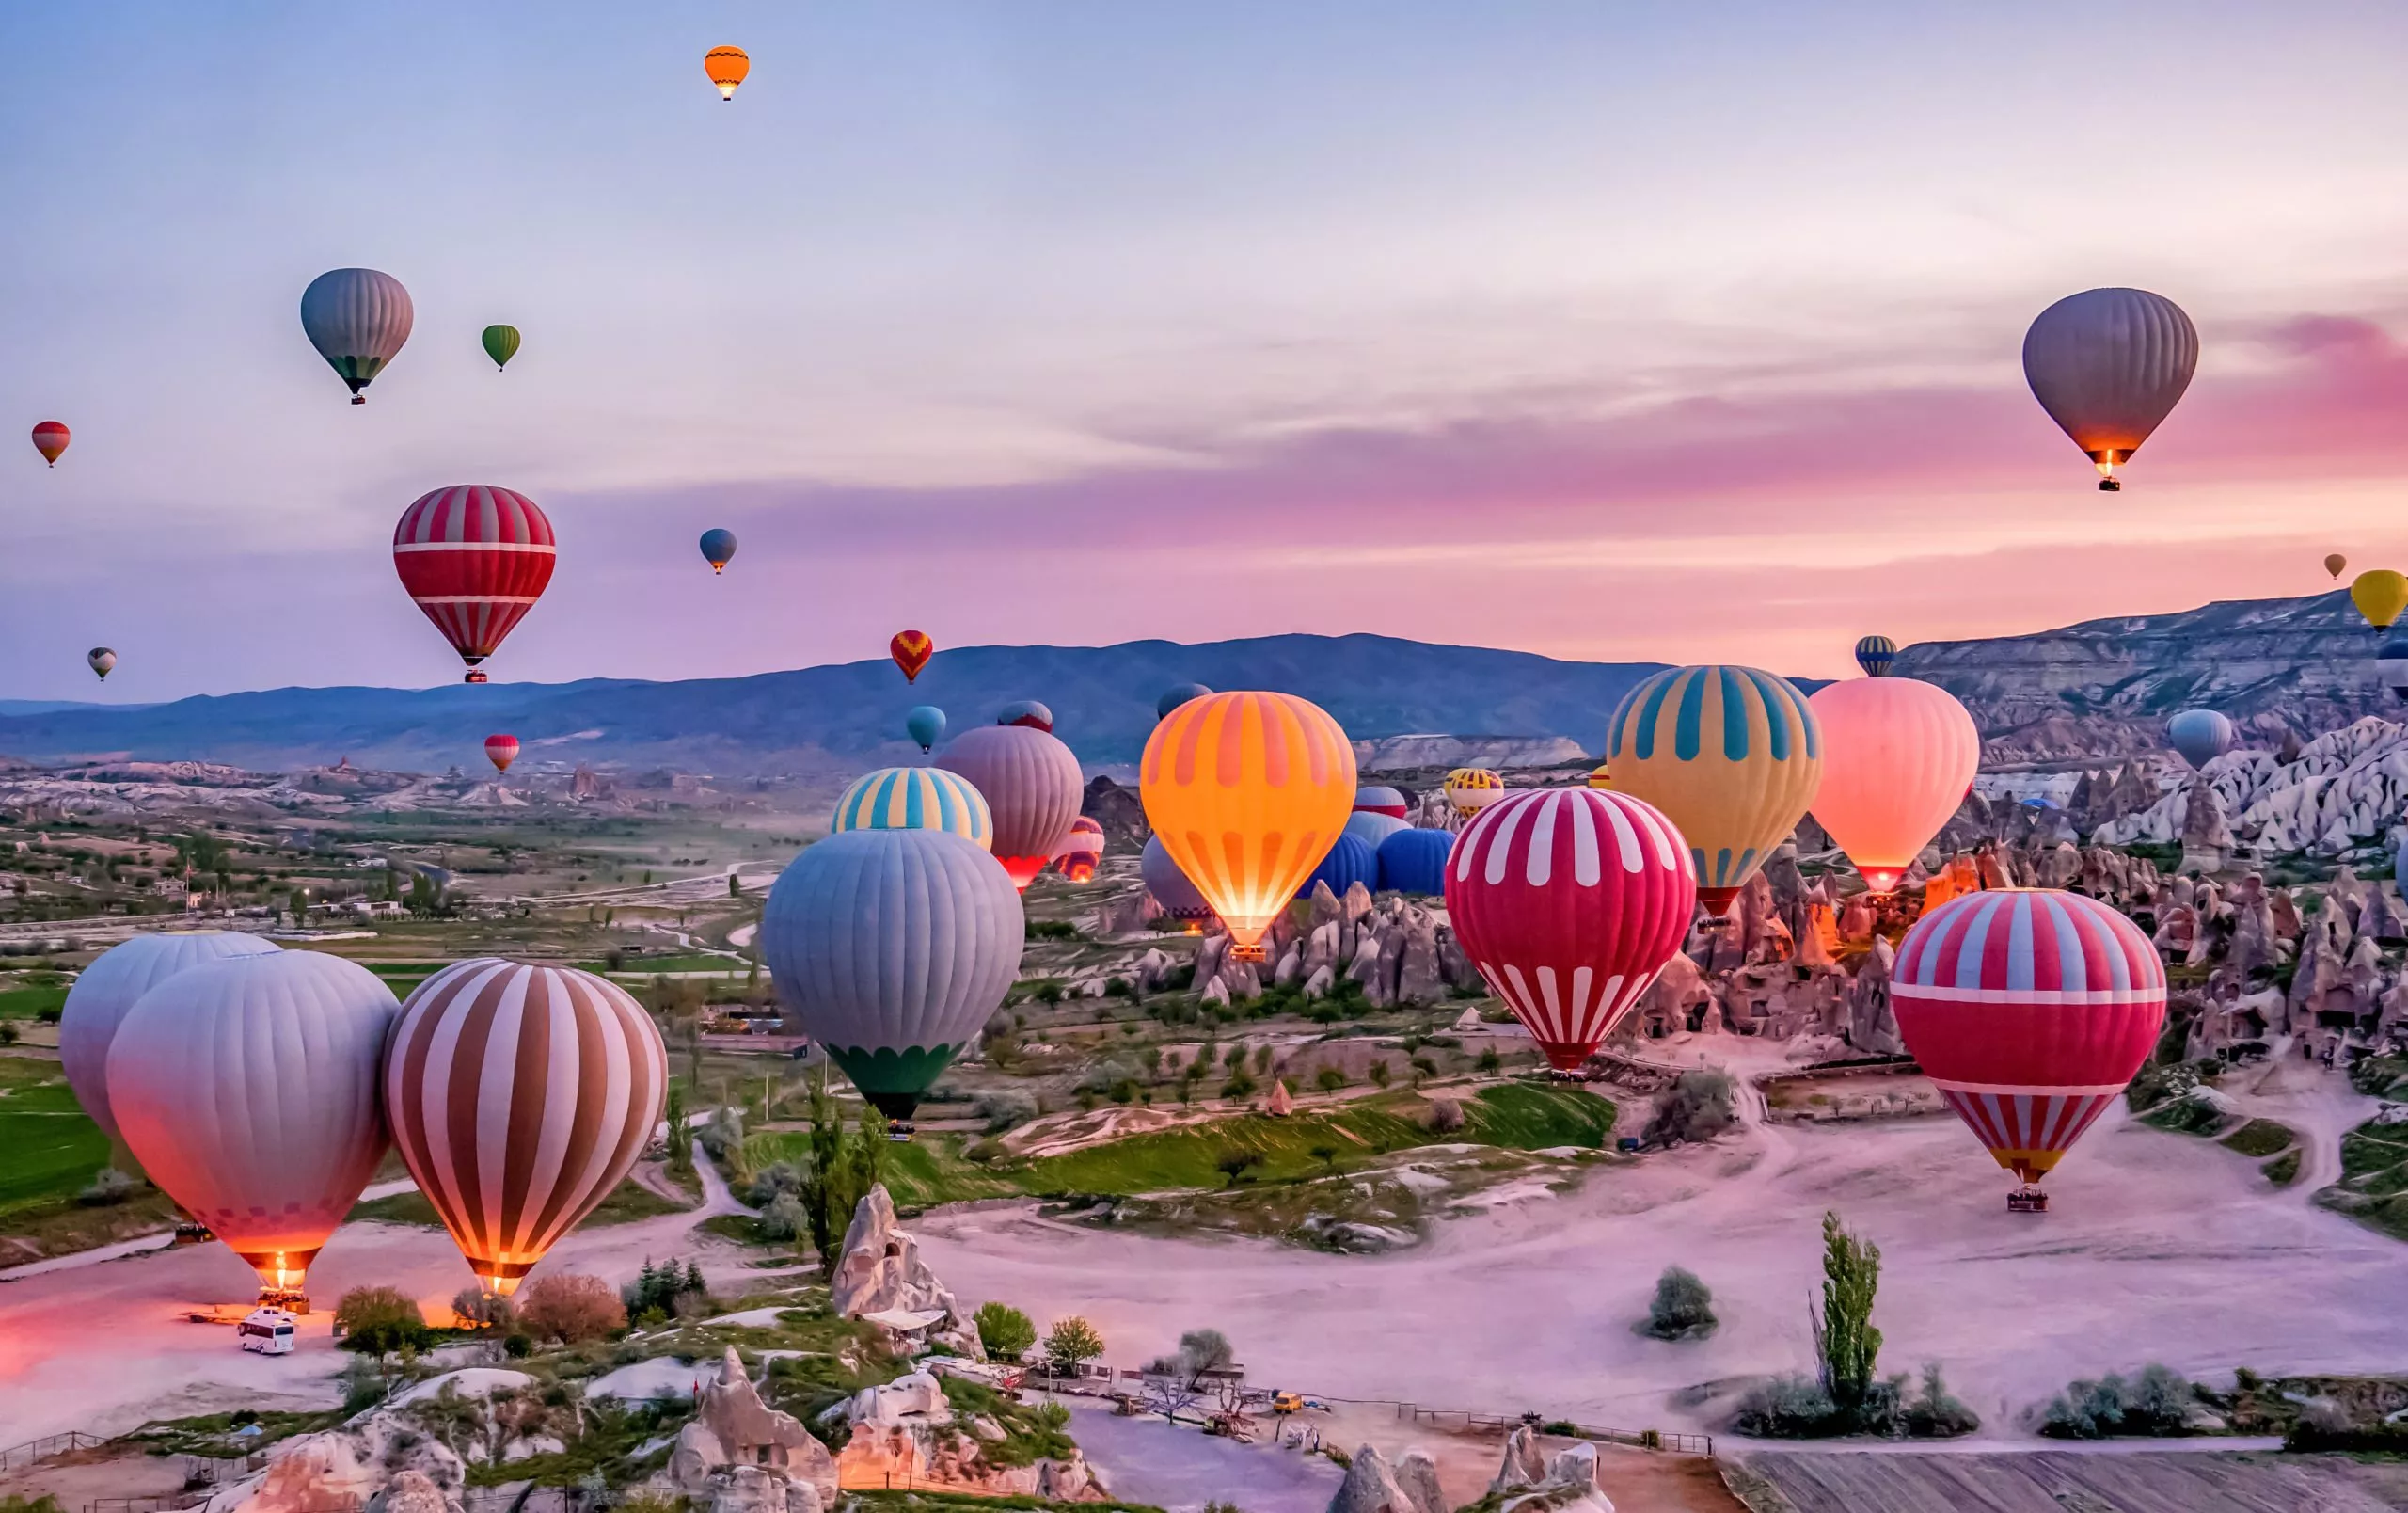 Cappadocia Voyager Balloons in Turkey, Central Asia | Hot Air Ballooning - Rated 8.1